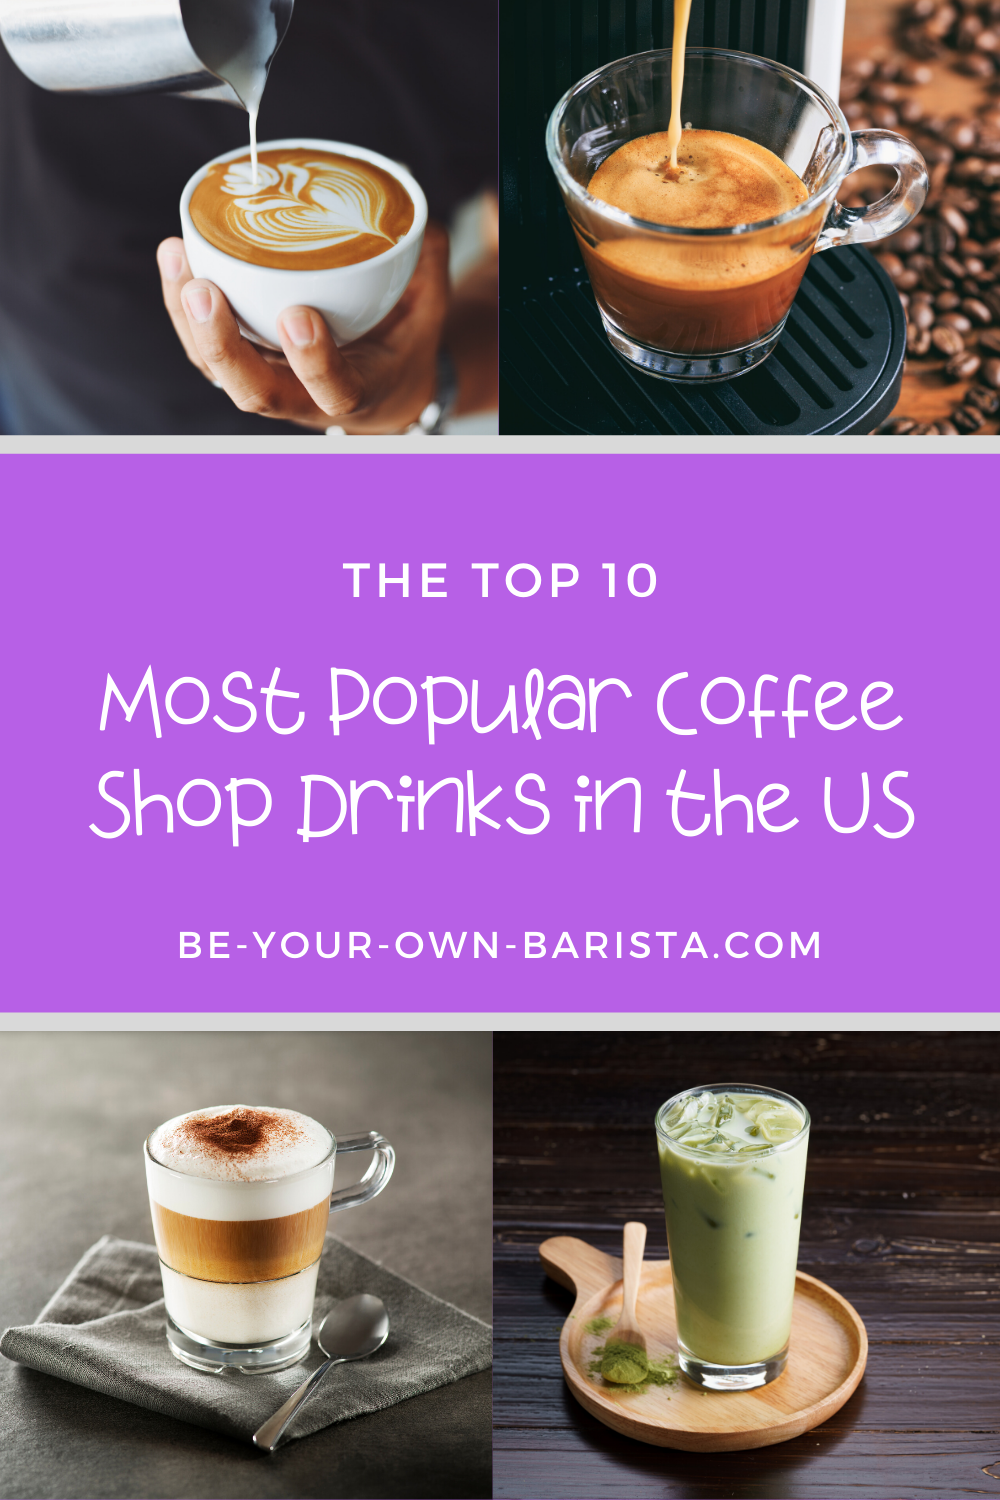 Whether you order them at home or pick them up at your favorite coffee shop, our list of the most popular coffee drinks in the US is sure to inspire any coffee lover!